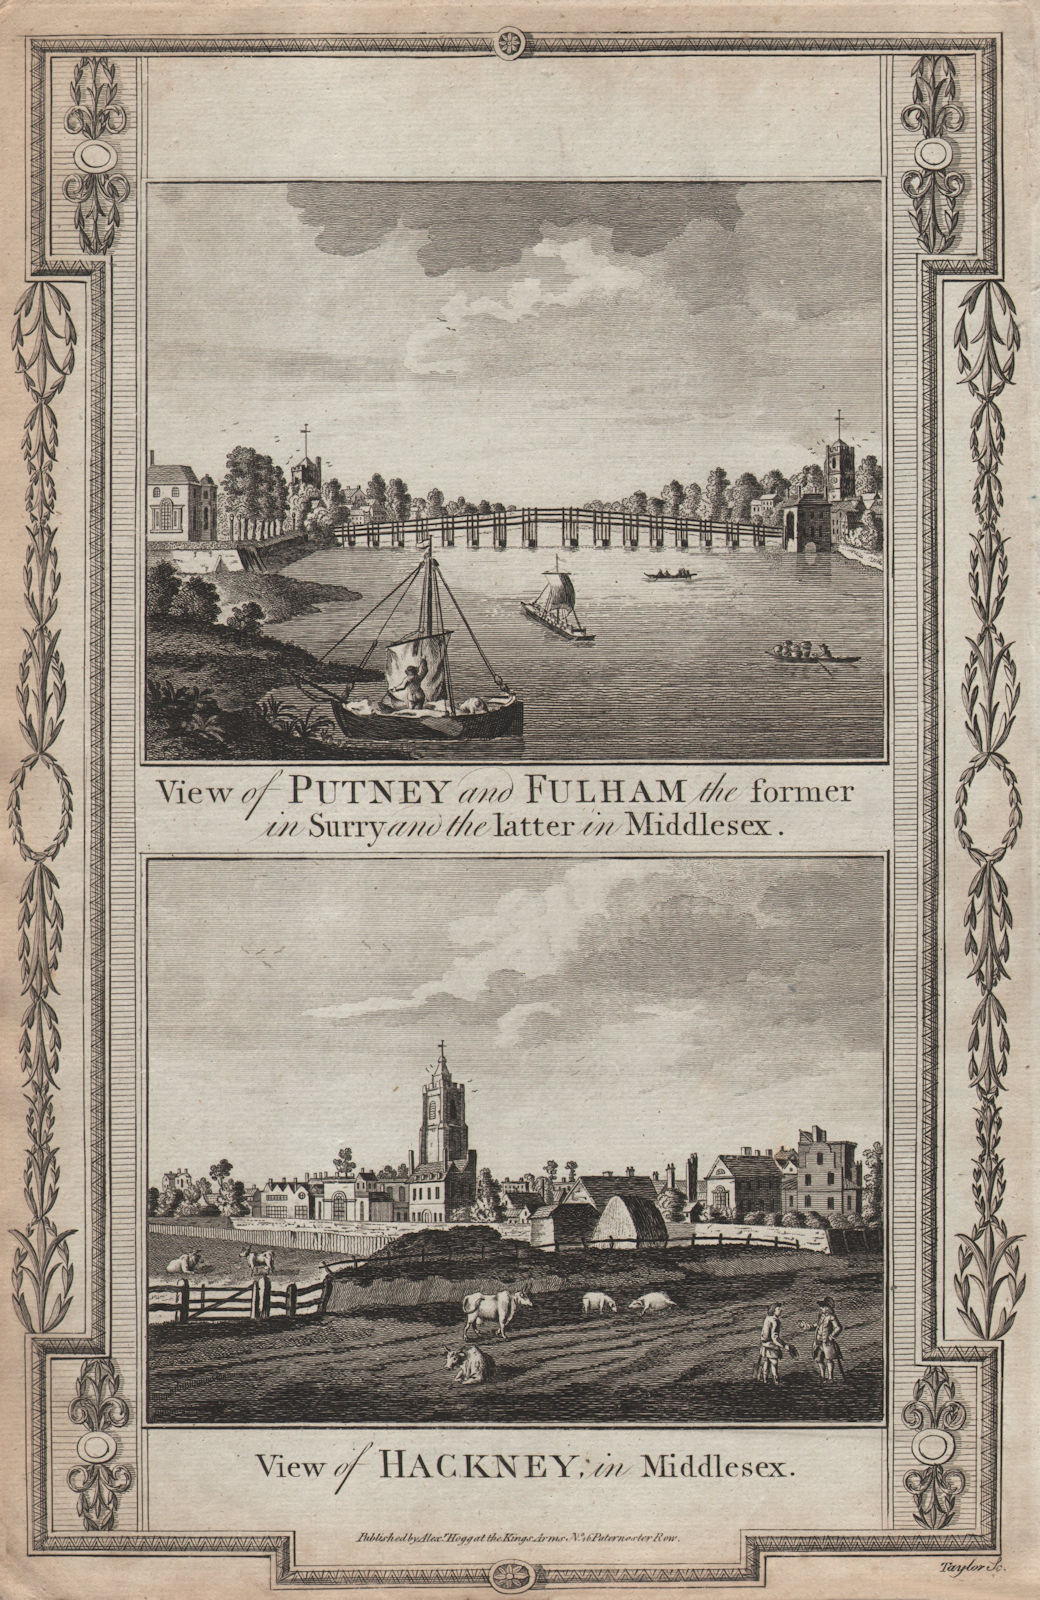 Views of Putney and Fulham, and Hackney. THORNTON 1784 old antique print